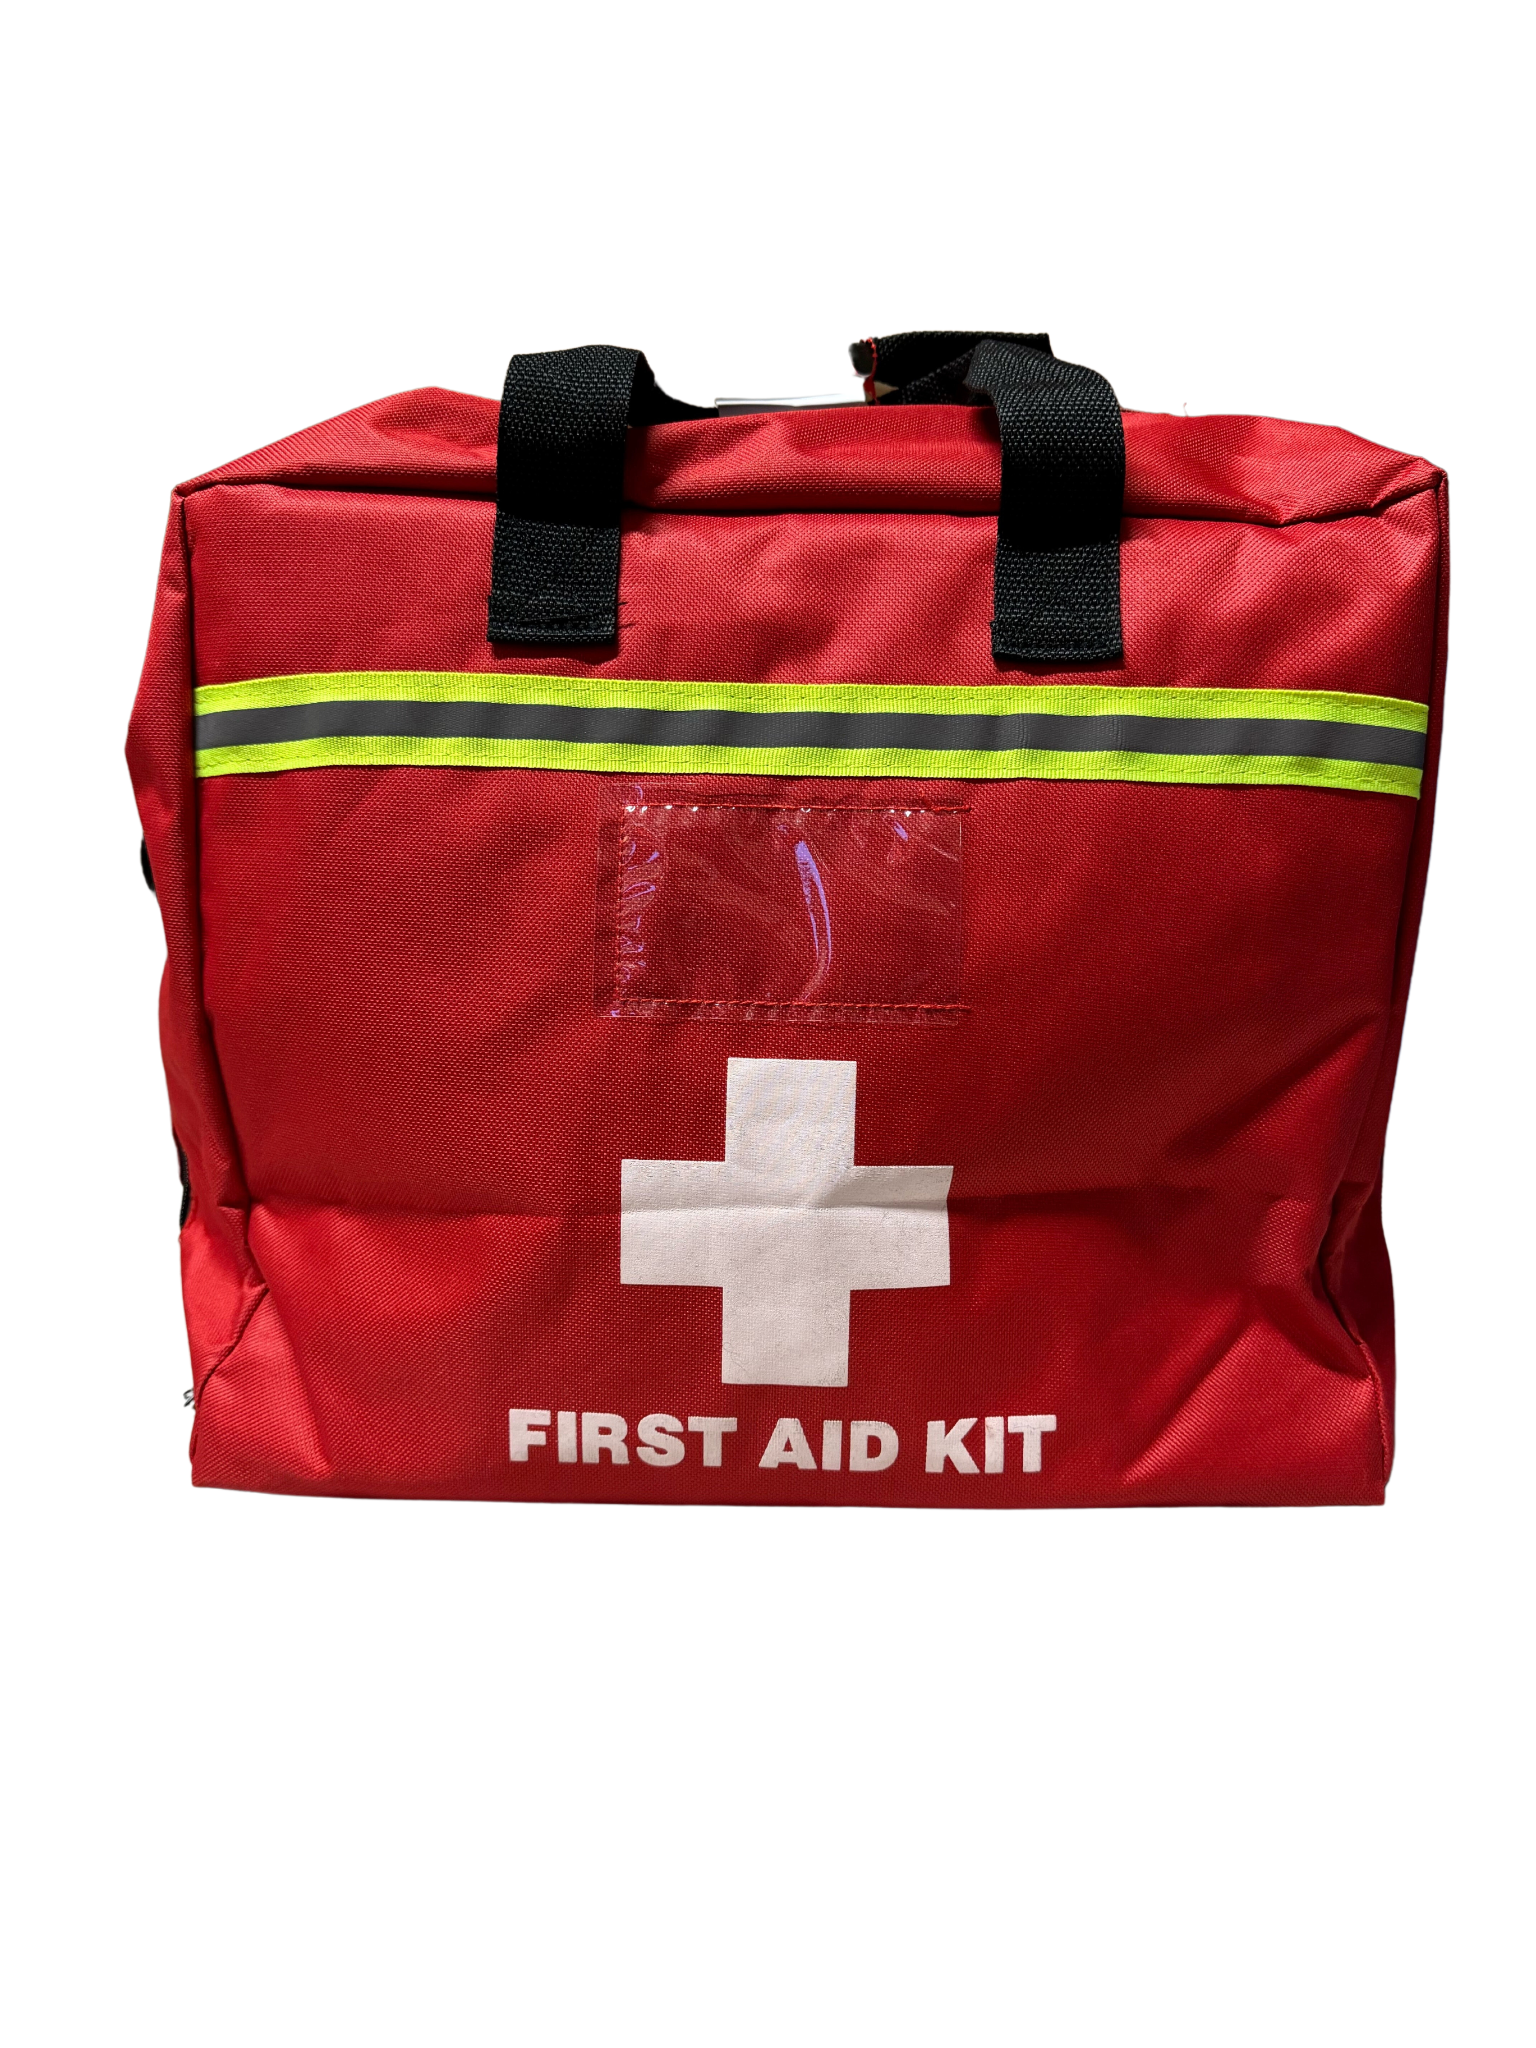 First Aid Kit: What to Put in it and How to Use it - Sheba Medical